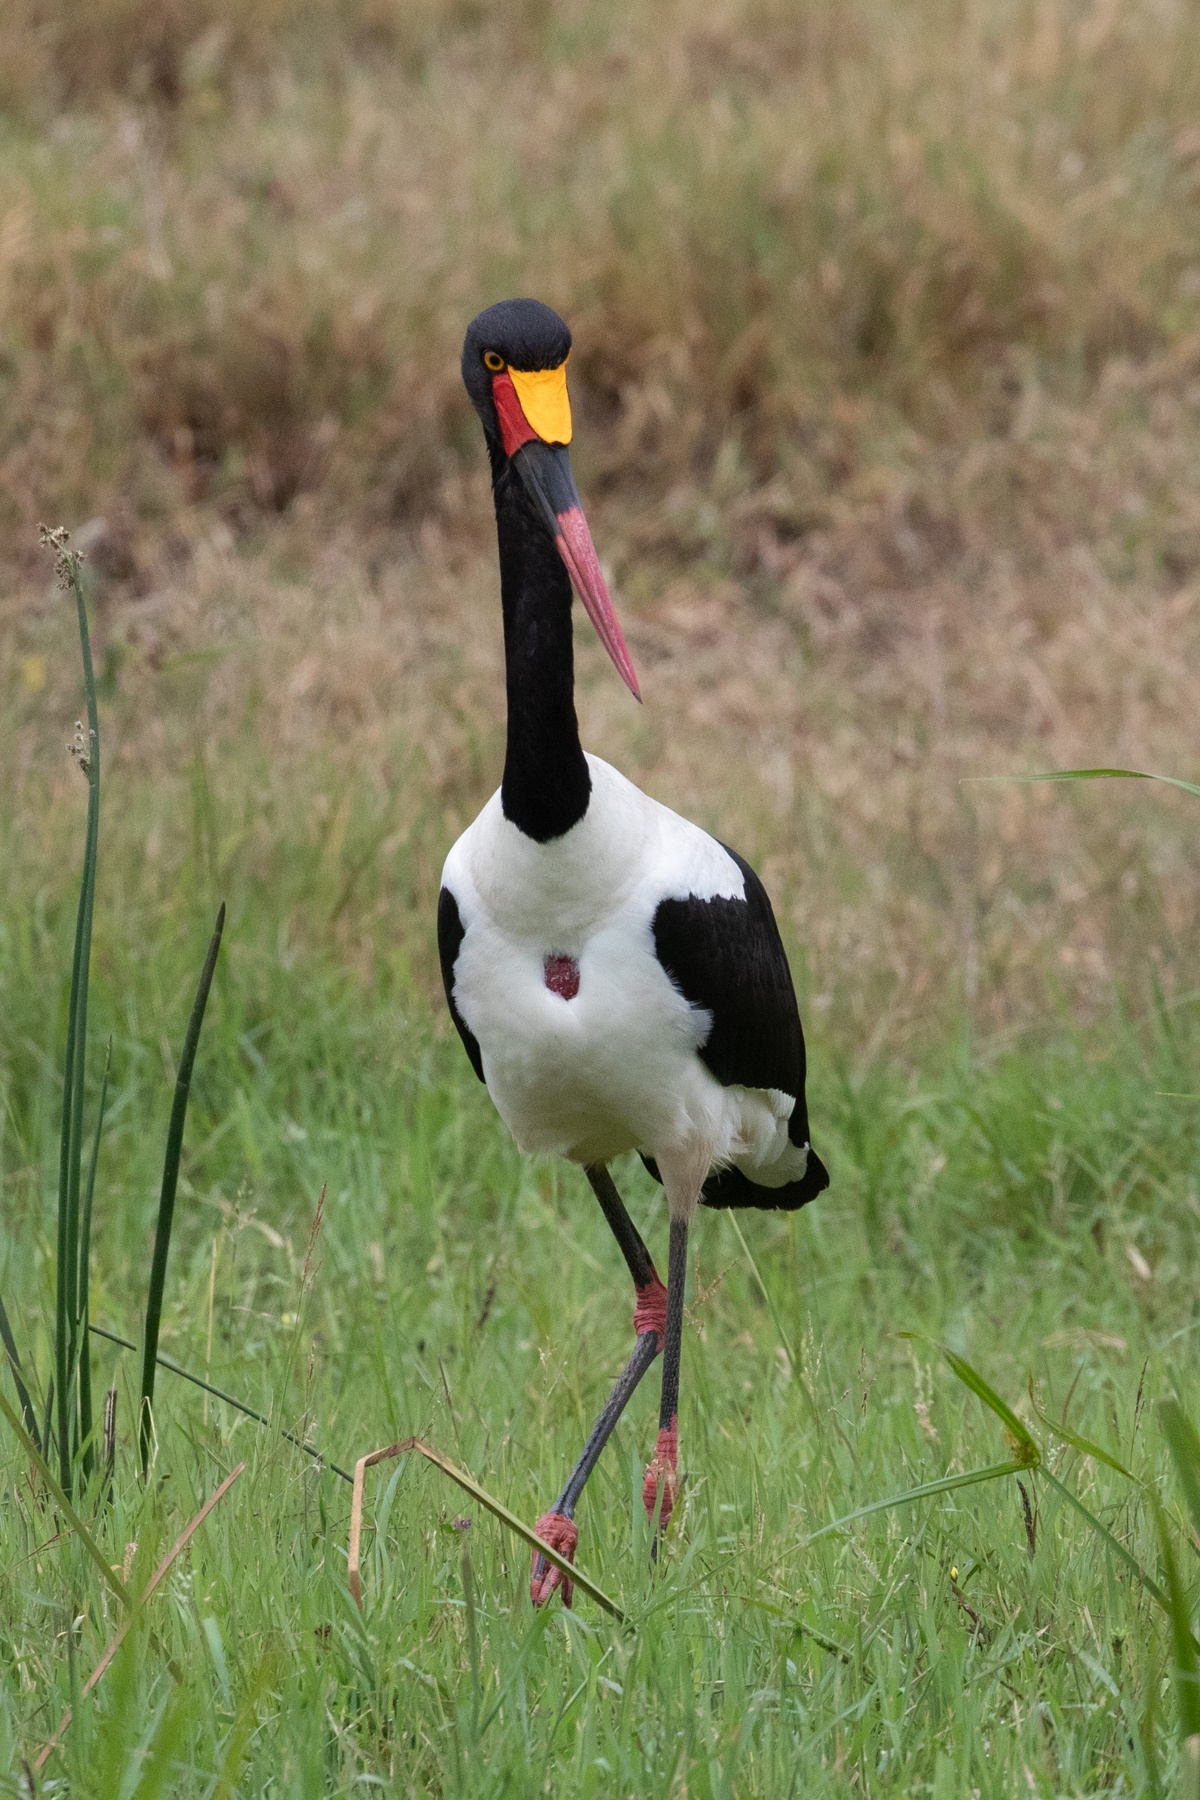 A statuesque Saddle-billed Stork looking for a breakfast of frogs